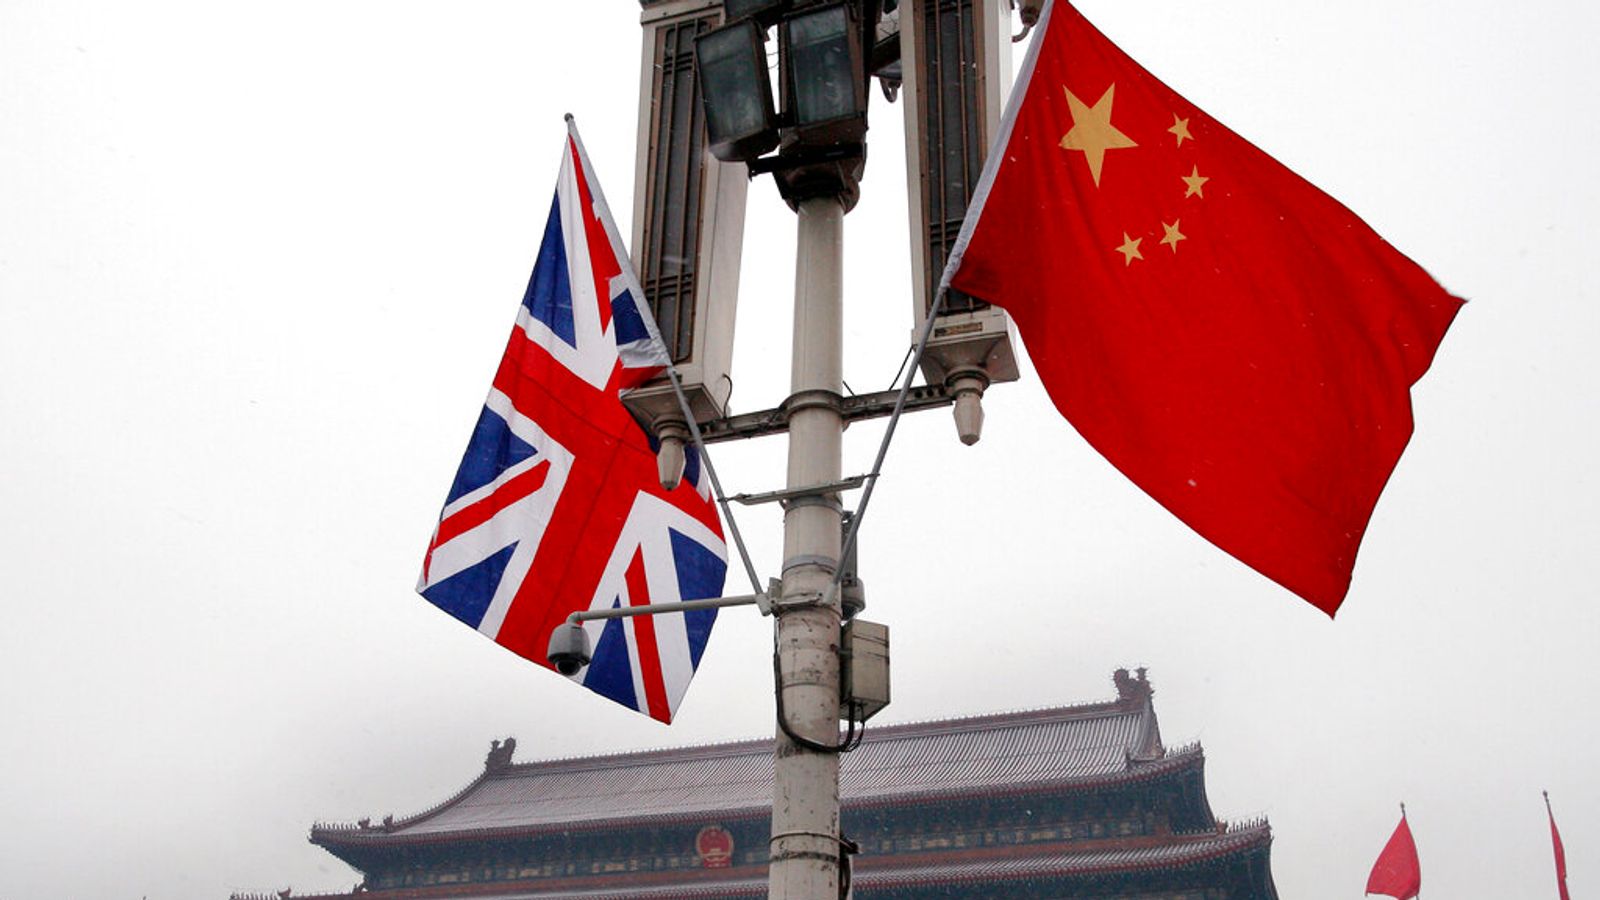 More UK sanctions expected over China democracy and security fears | Politics News